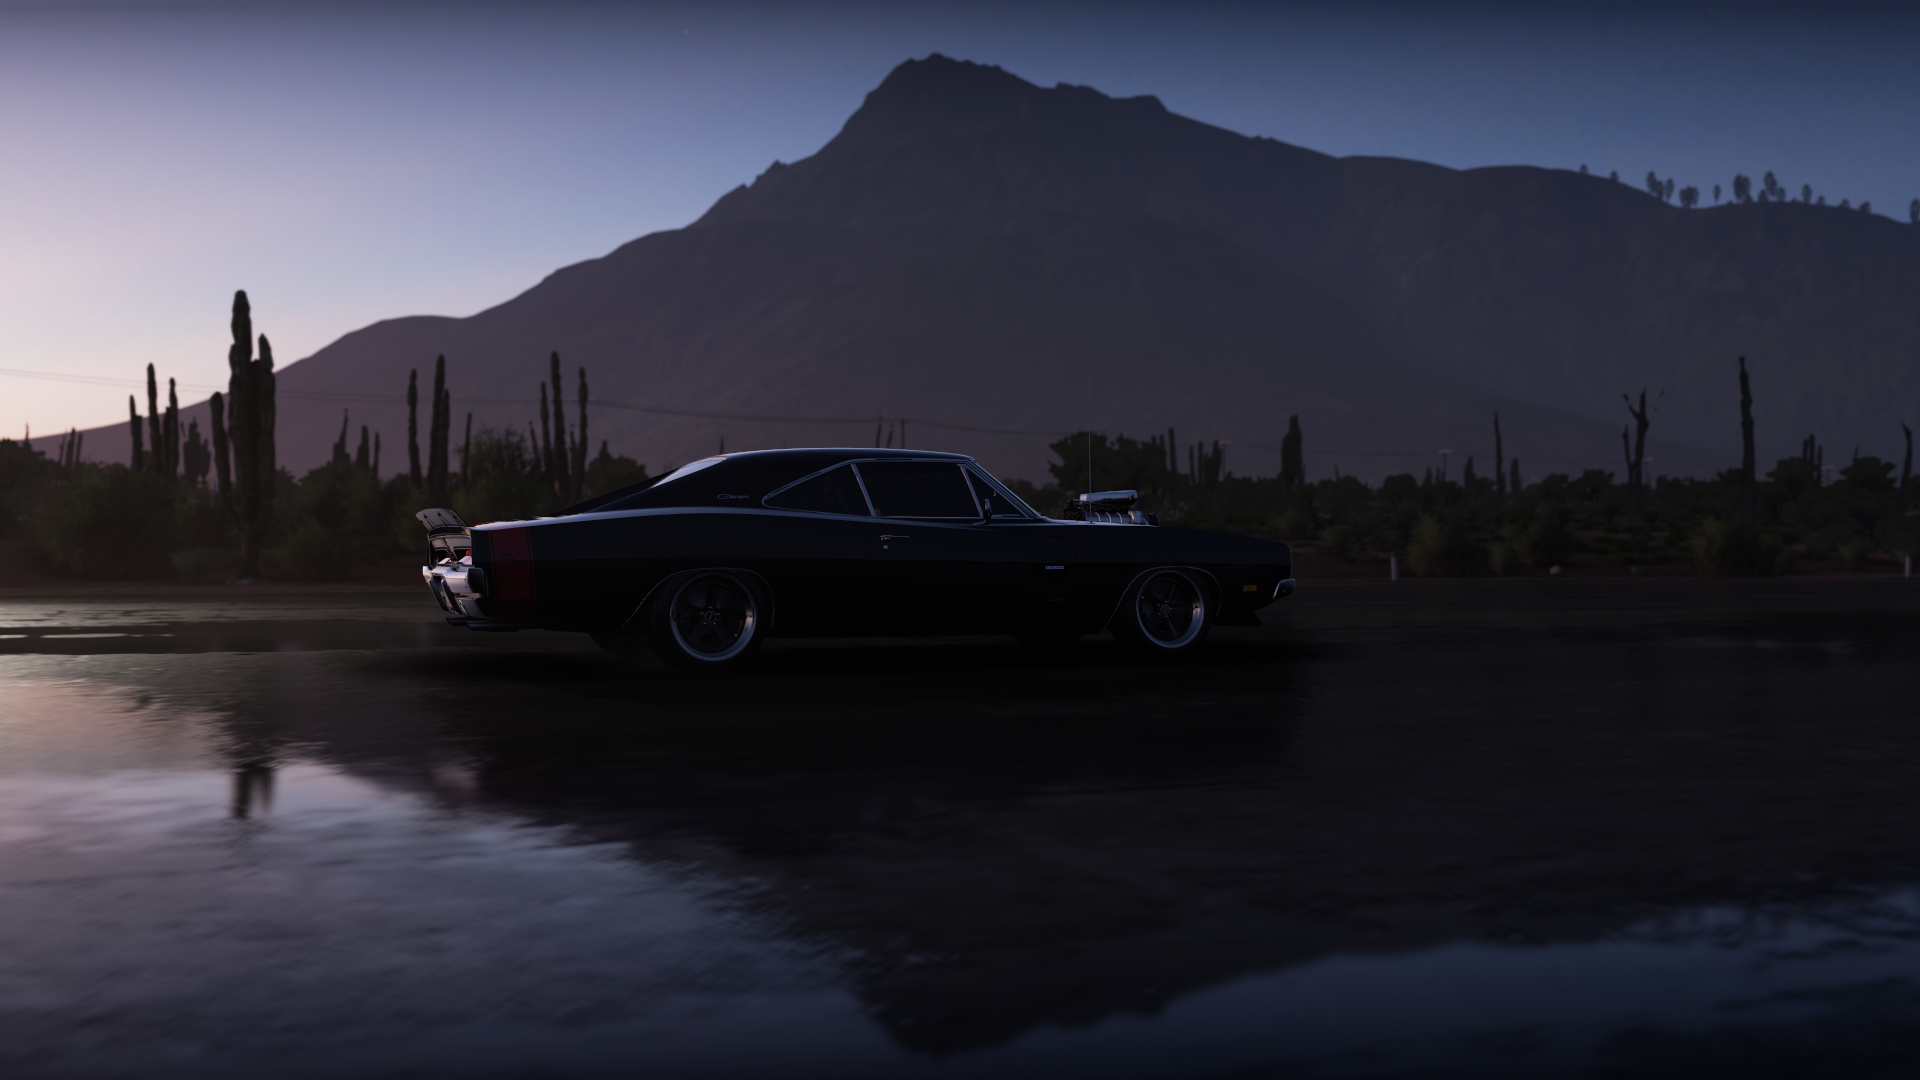 Forza Horizon 5 Video Games Dark Car Dodge Charger Muscle Cars American Cars PlaygroundGames Sky Sup 1920x1080